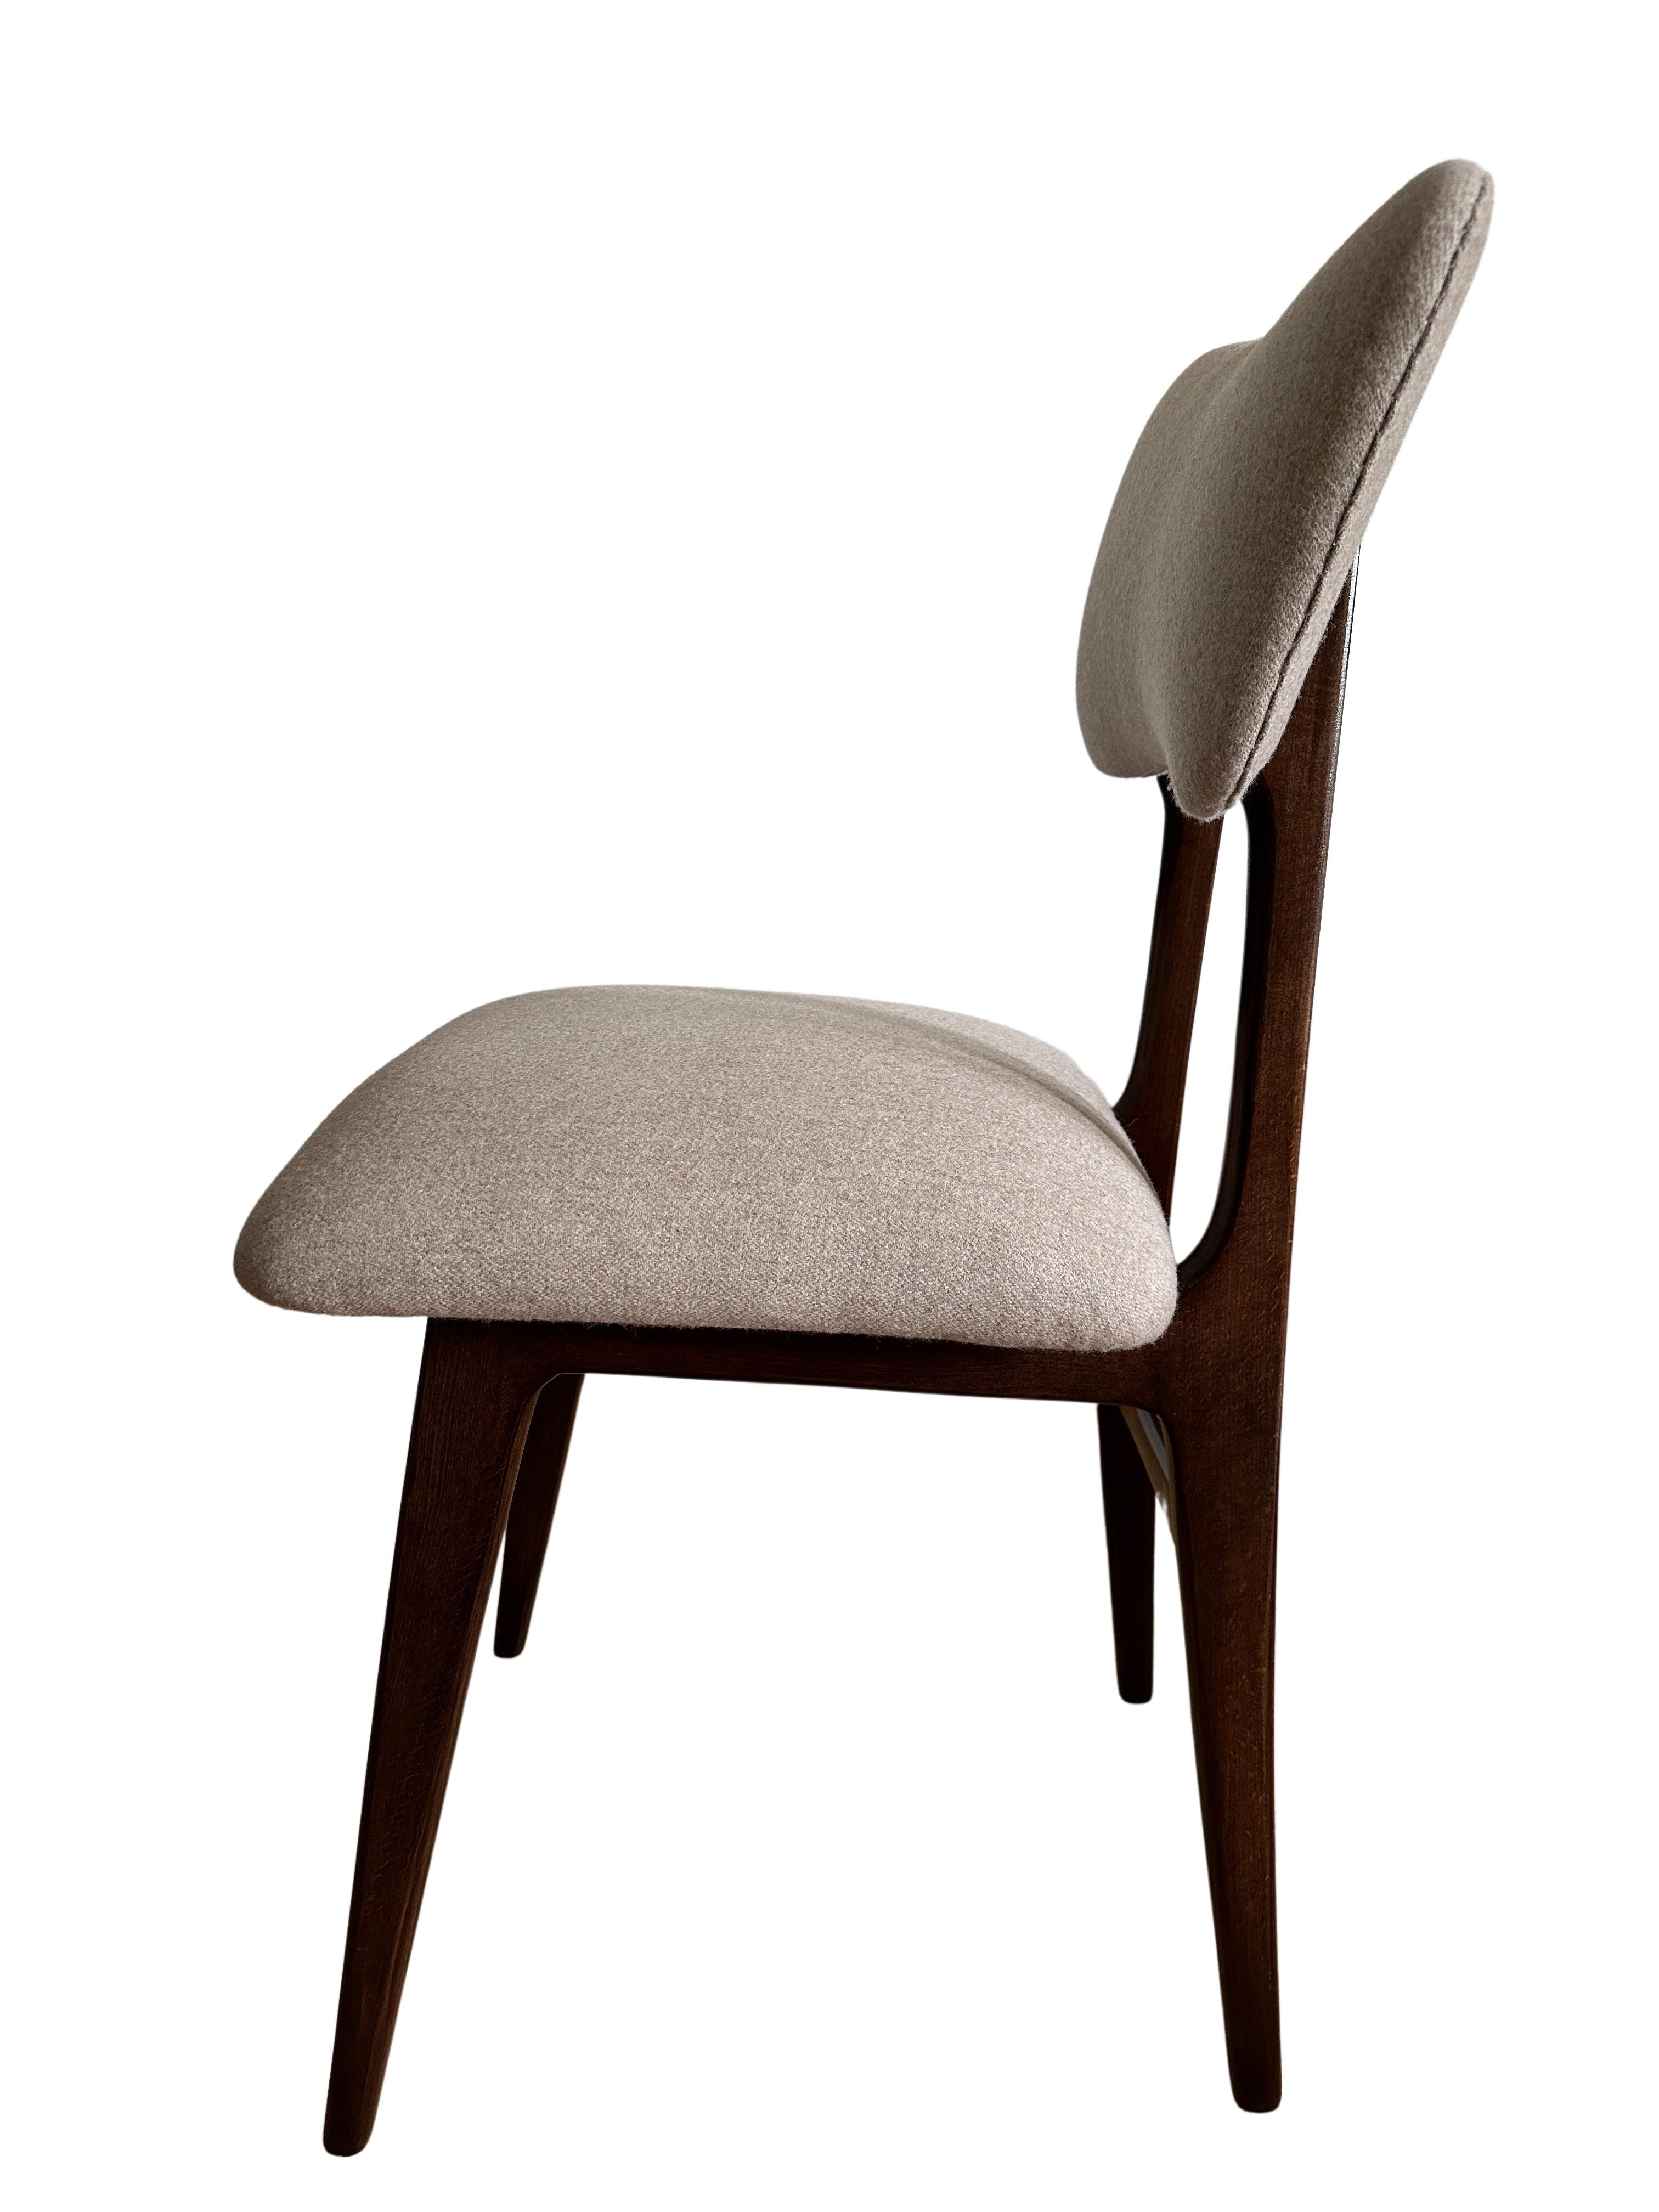 Set of 6 Midcentury Dining Chairs in Beige Wool Upholstery, Poland, 1960s For Sale 2